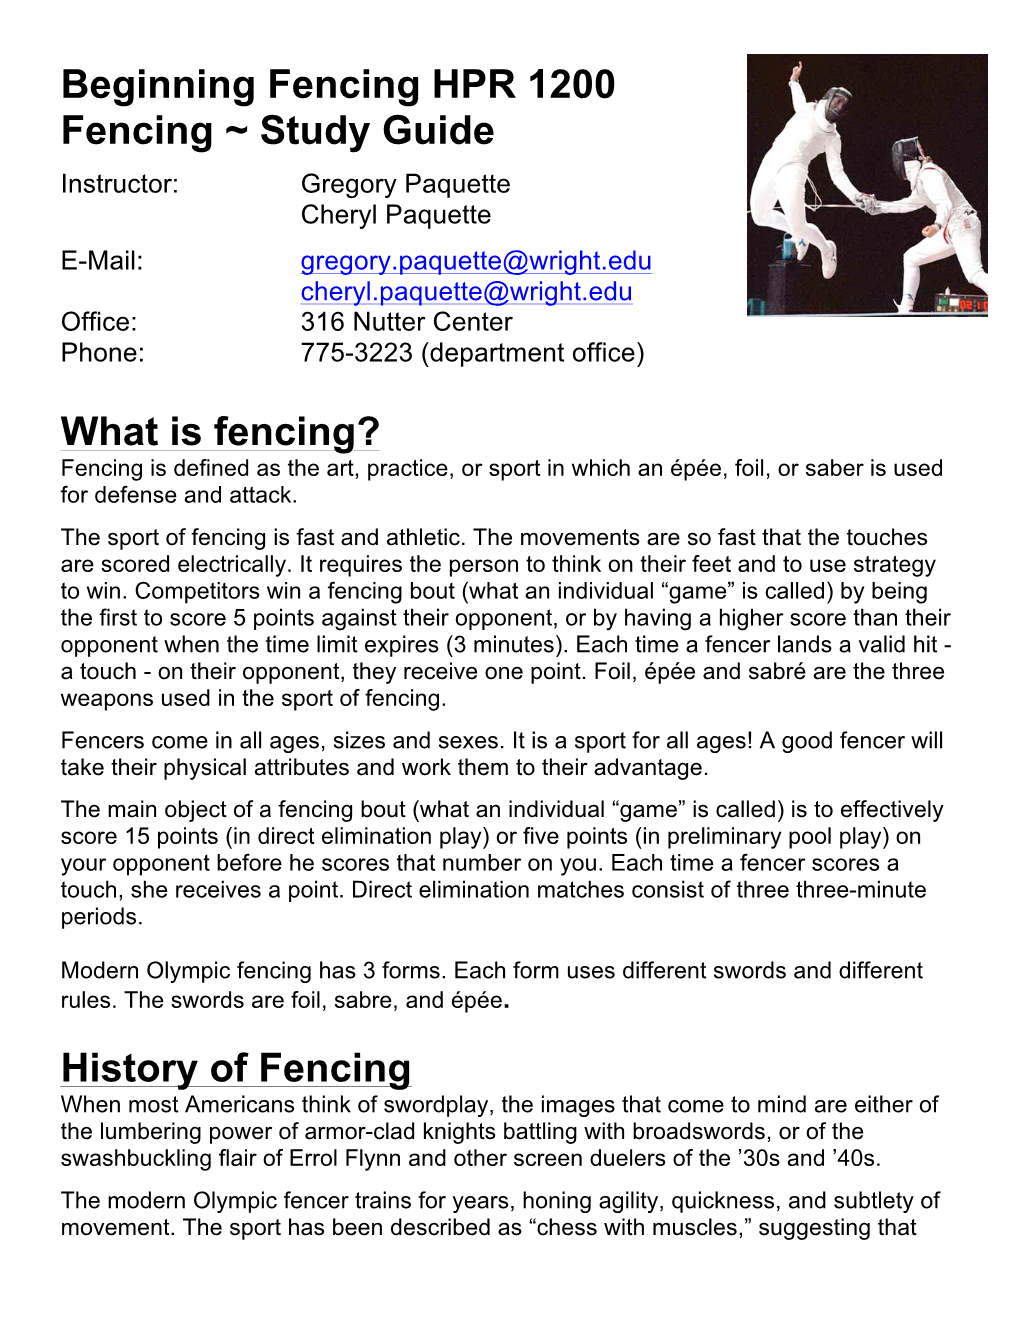 Study Guide What Is Fencing?